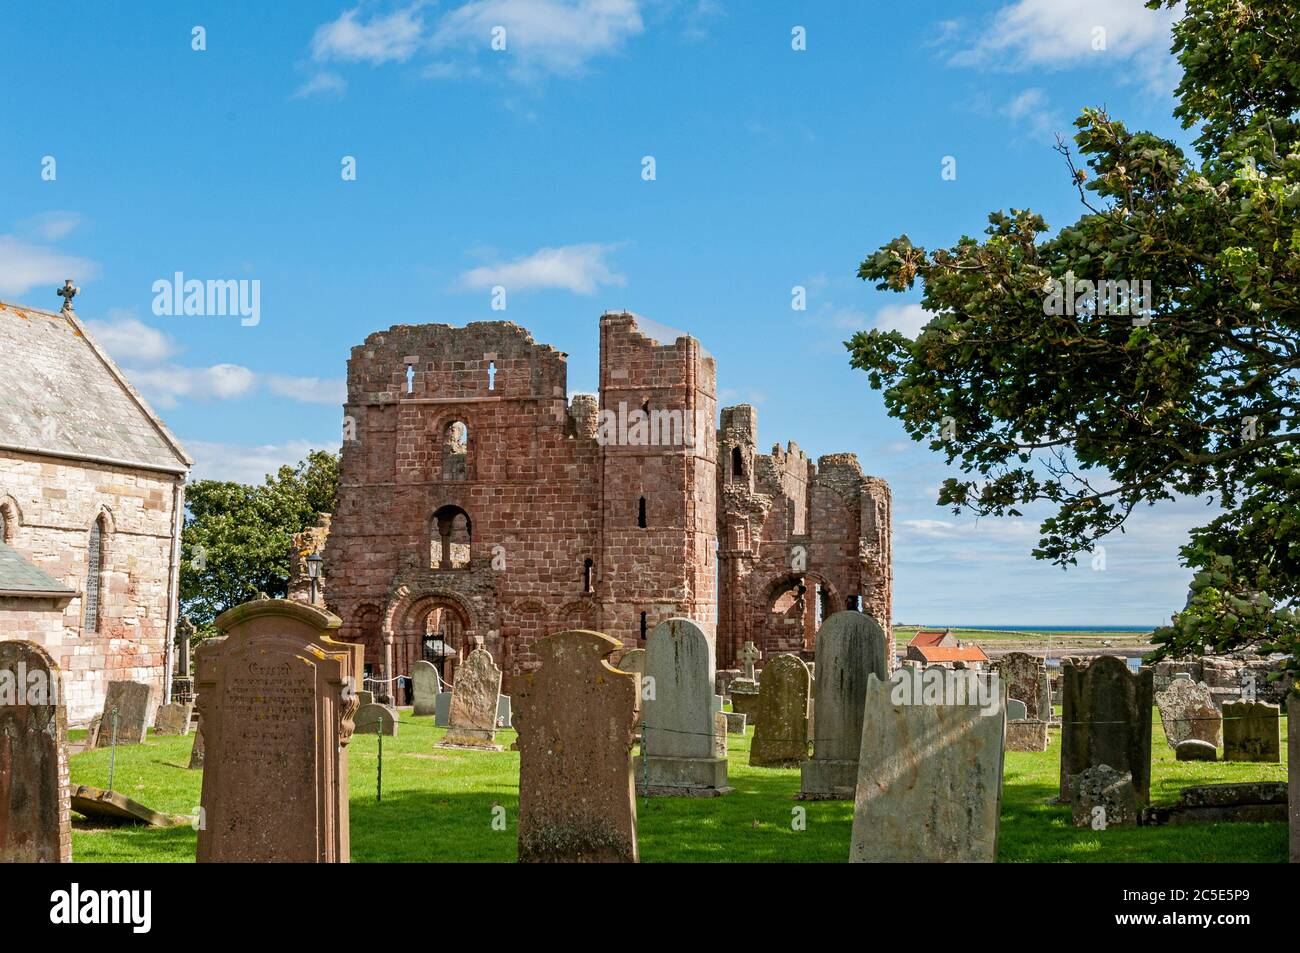 The imposing fortified west doorway of the dark red sandstone church of Lindisfarne Priory with one tower still standing and crossbow loops visible Stock Photo